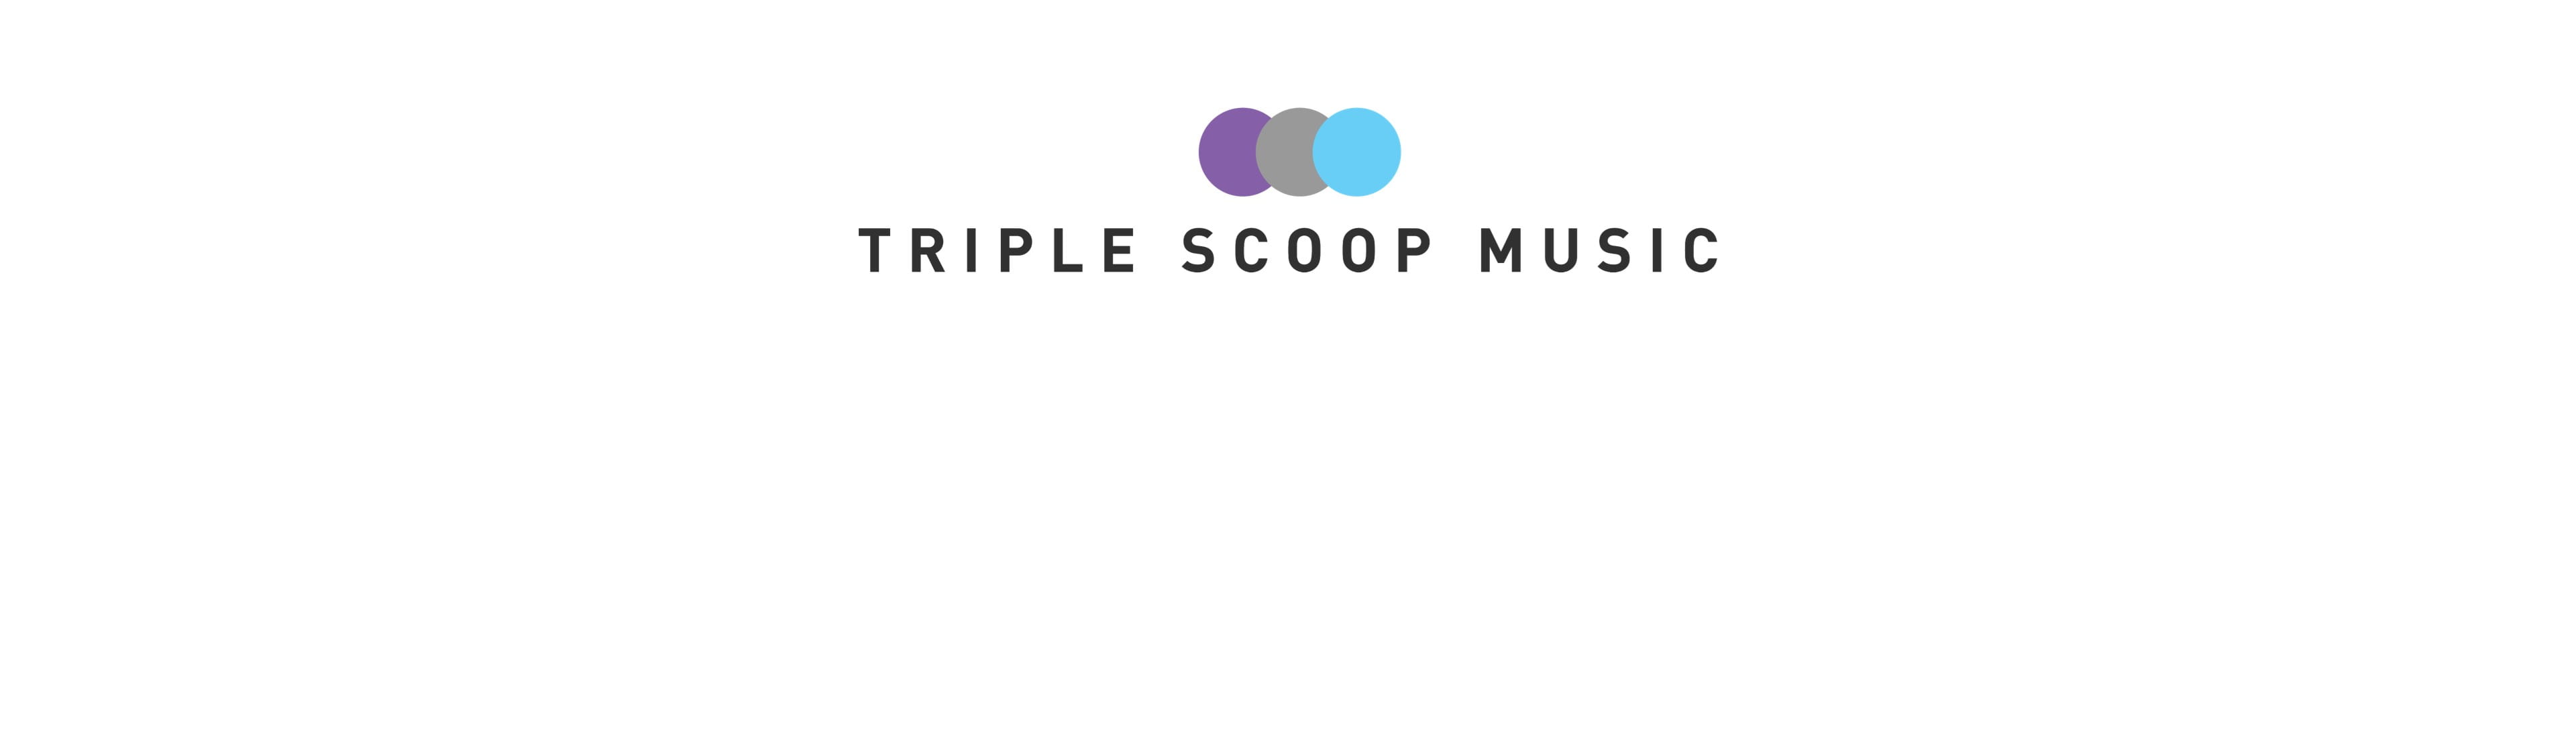 zno slideshow partnered with triple scoop music